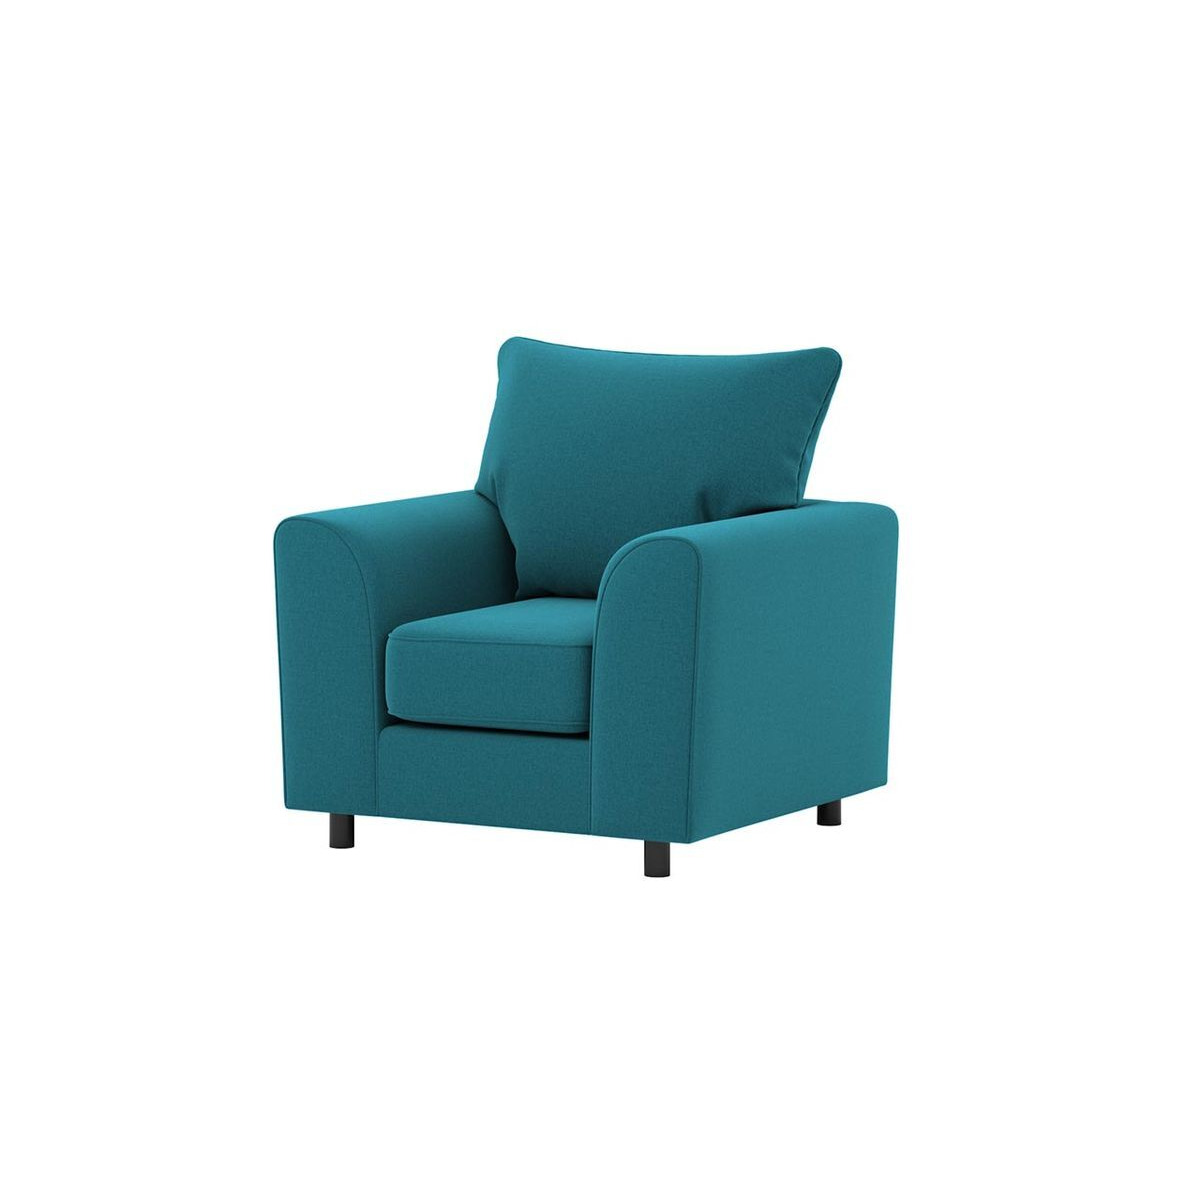 Dillon Armchair, turquoise - image 1